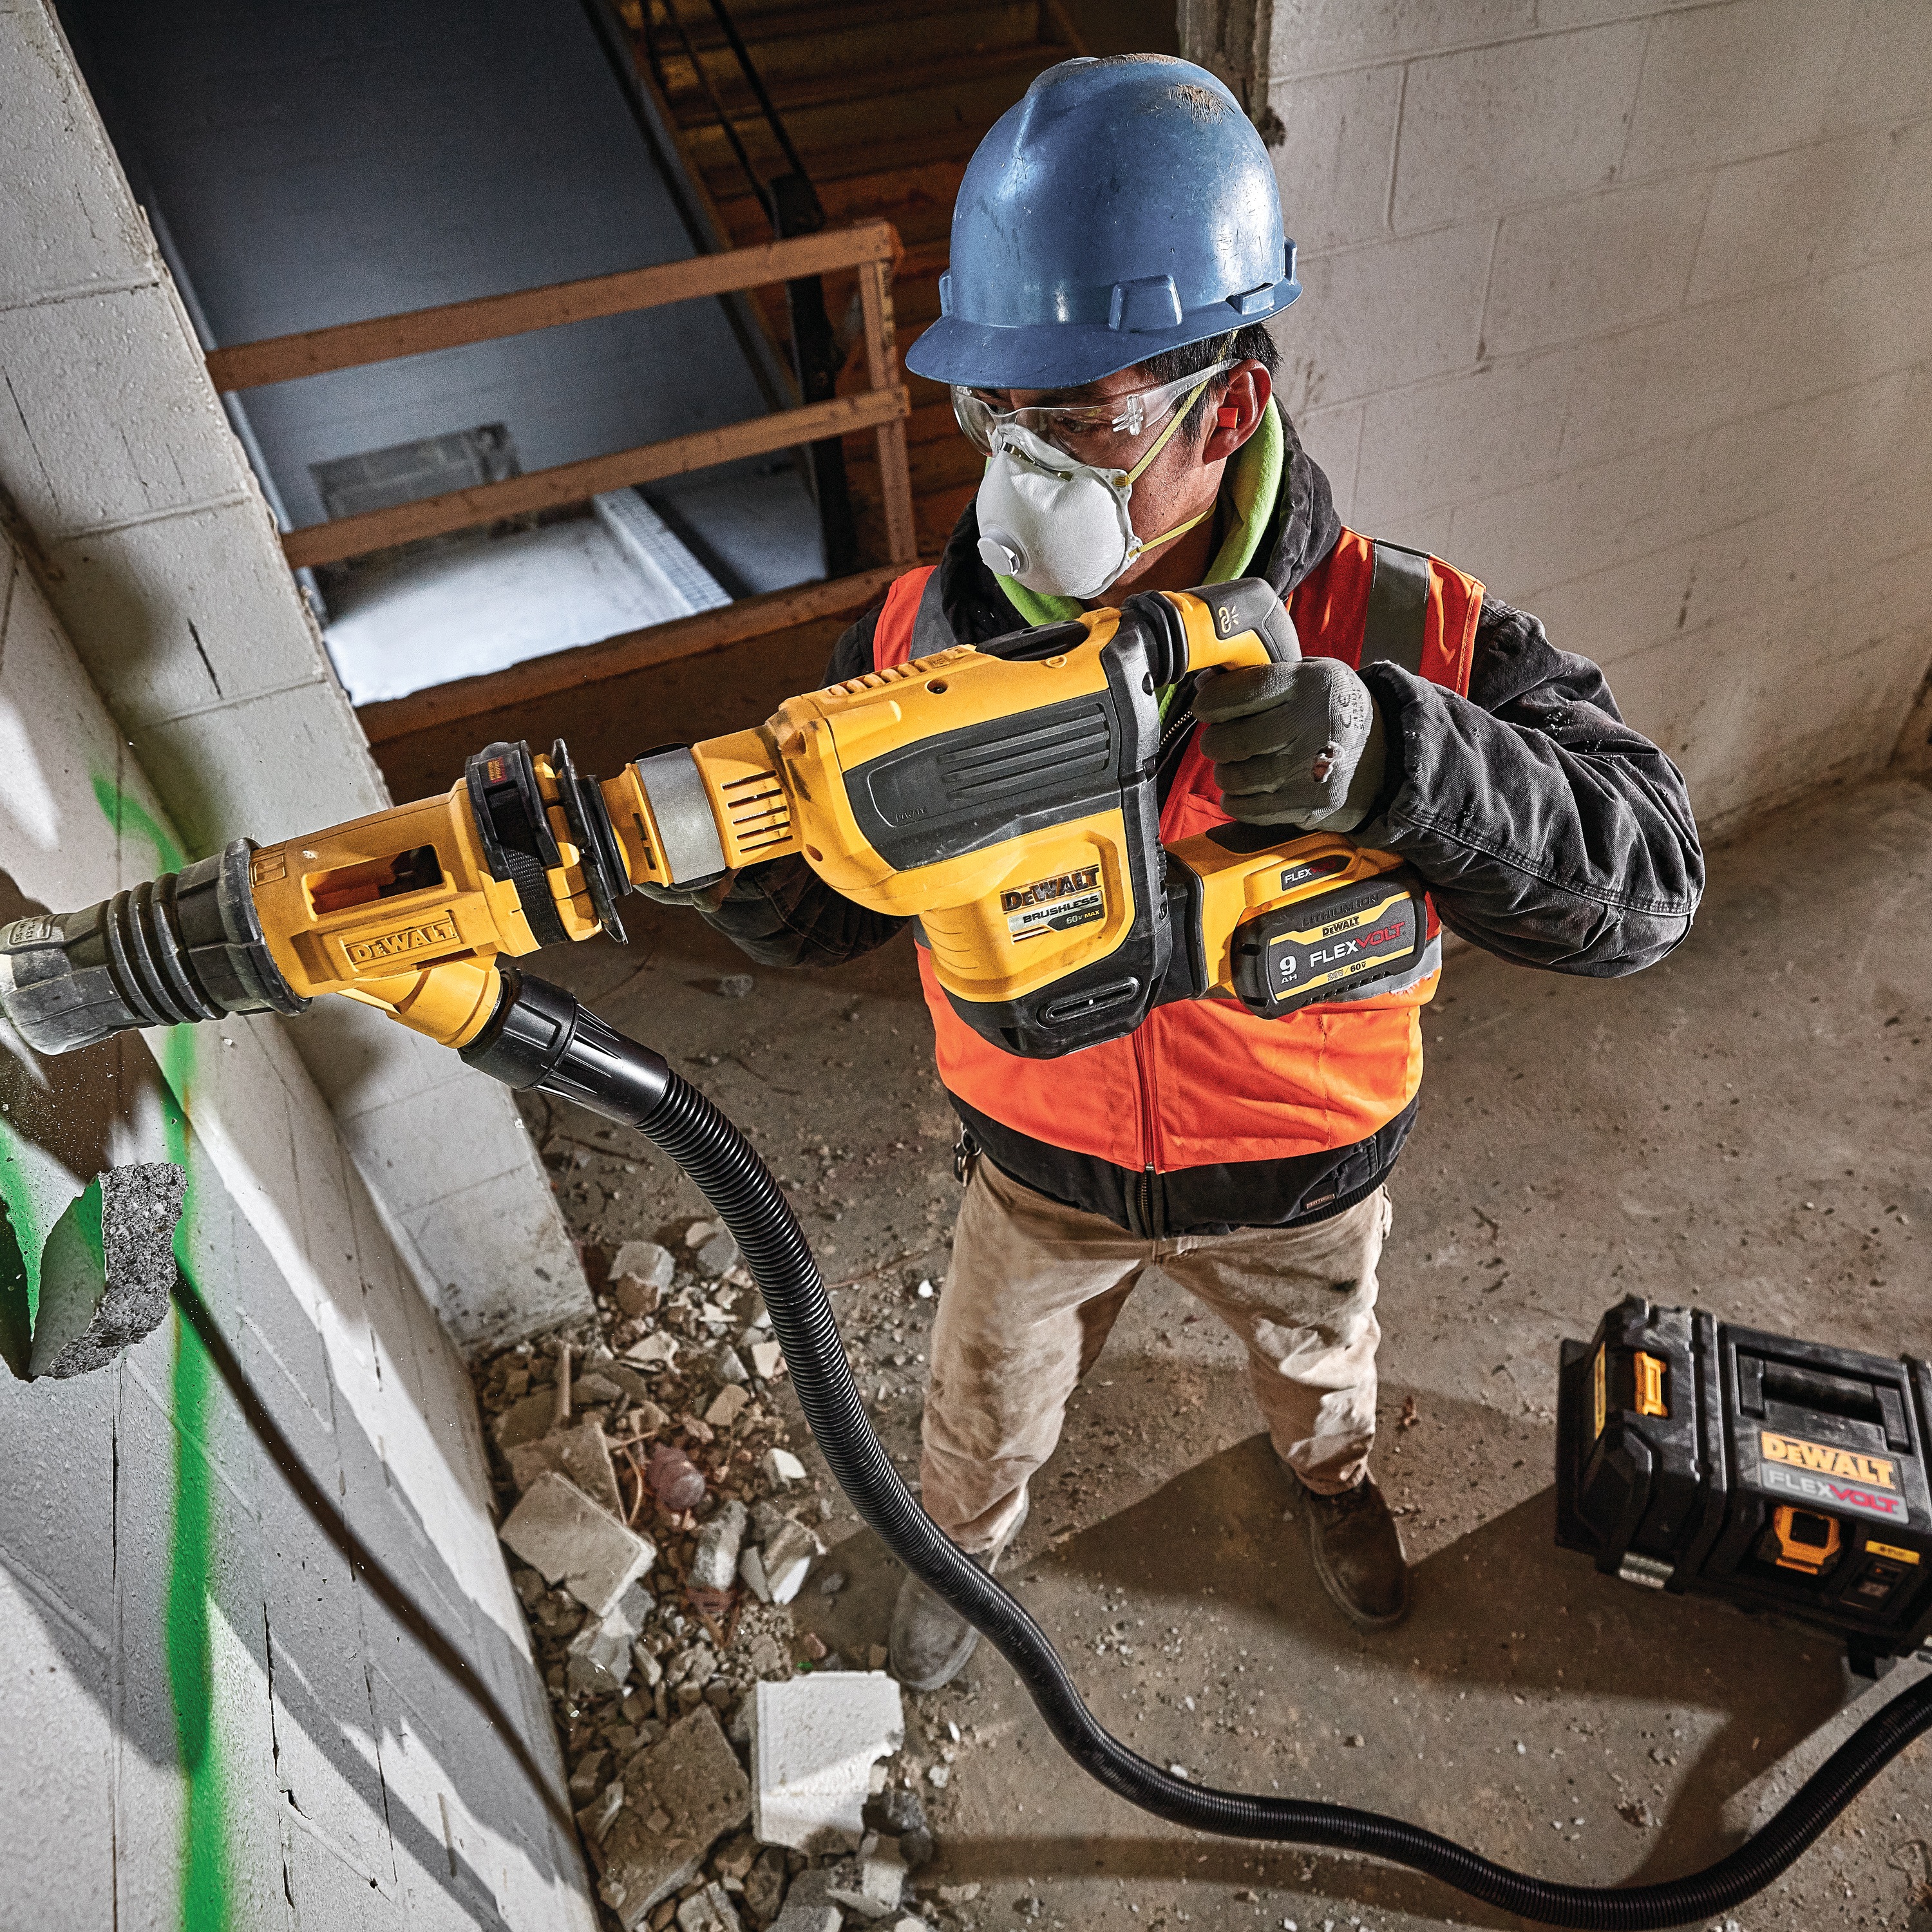 Overhead view of Demolition hammer dust shroud chiseling being used by a person to chisel. 